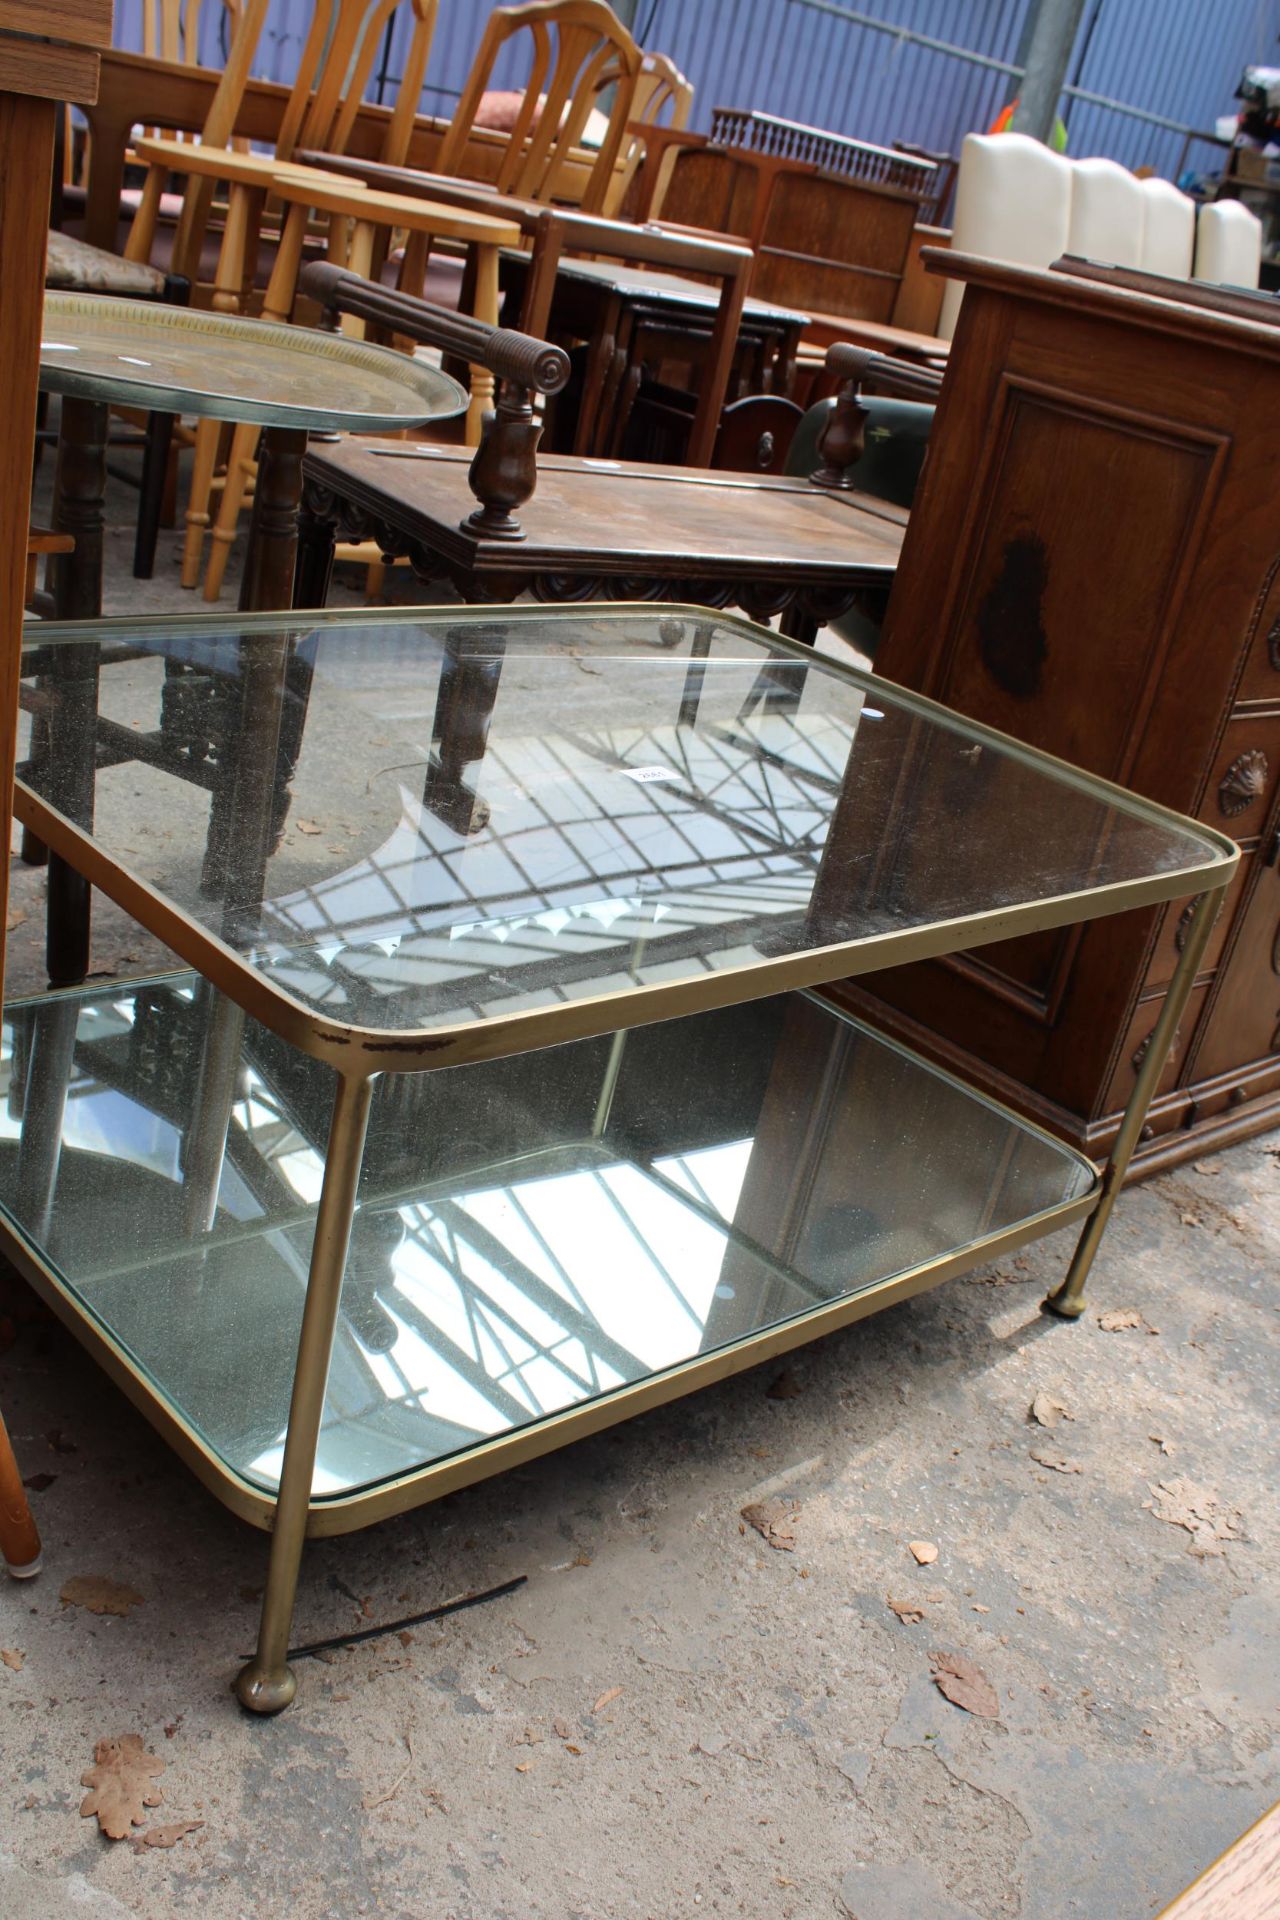 A MODERN METAL FRAMED COFFEE TABLE WITH MIRRORED BASE SHELF AND GLASS TOP SHELF, 31" X 23" - Image 2 of 3